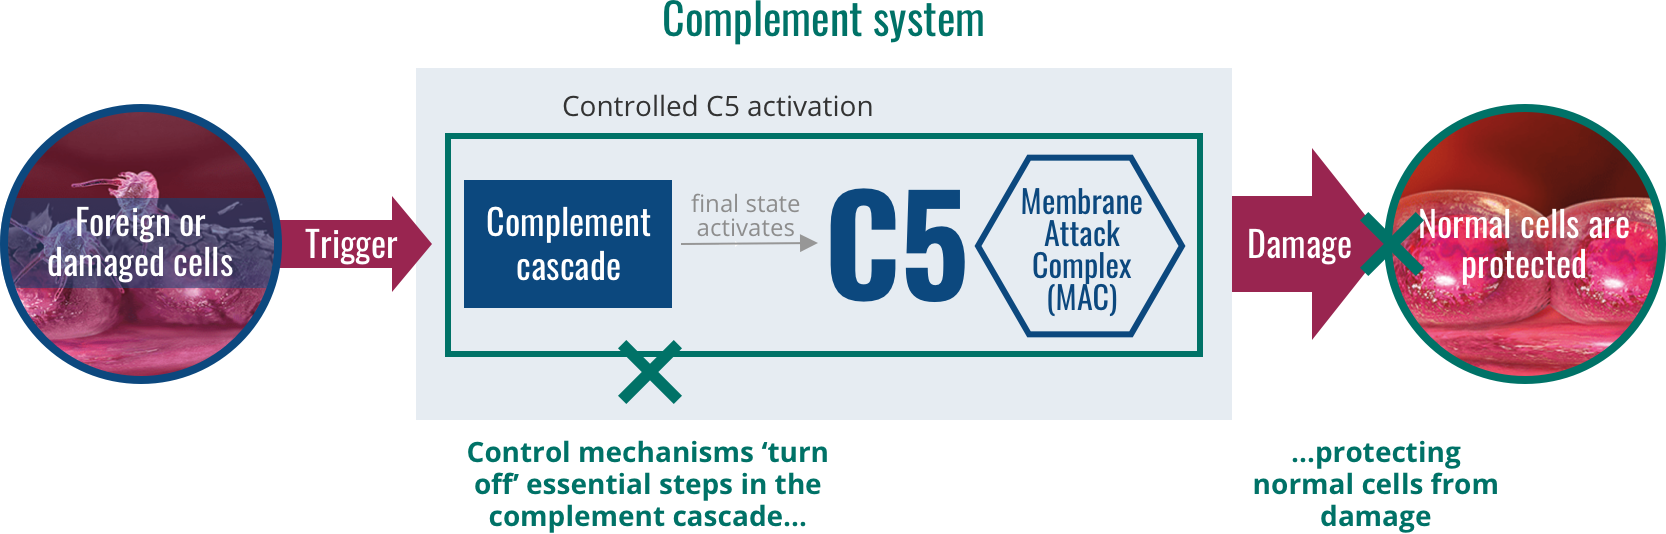 Normally functioning complement system